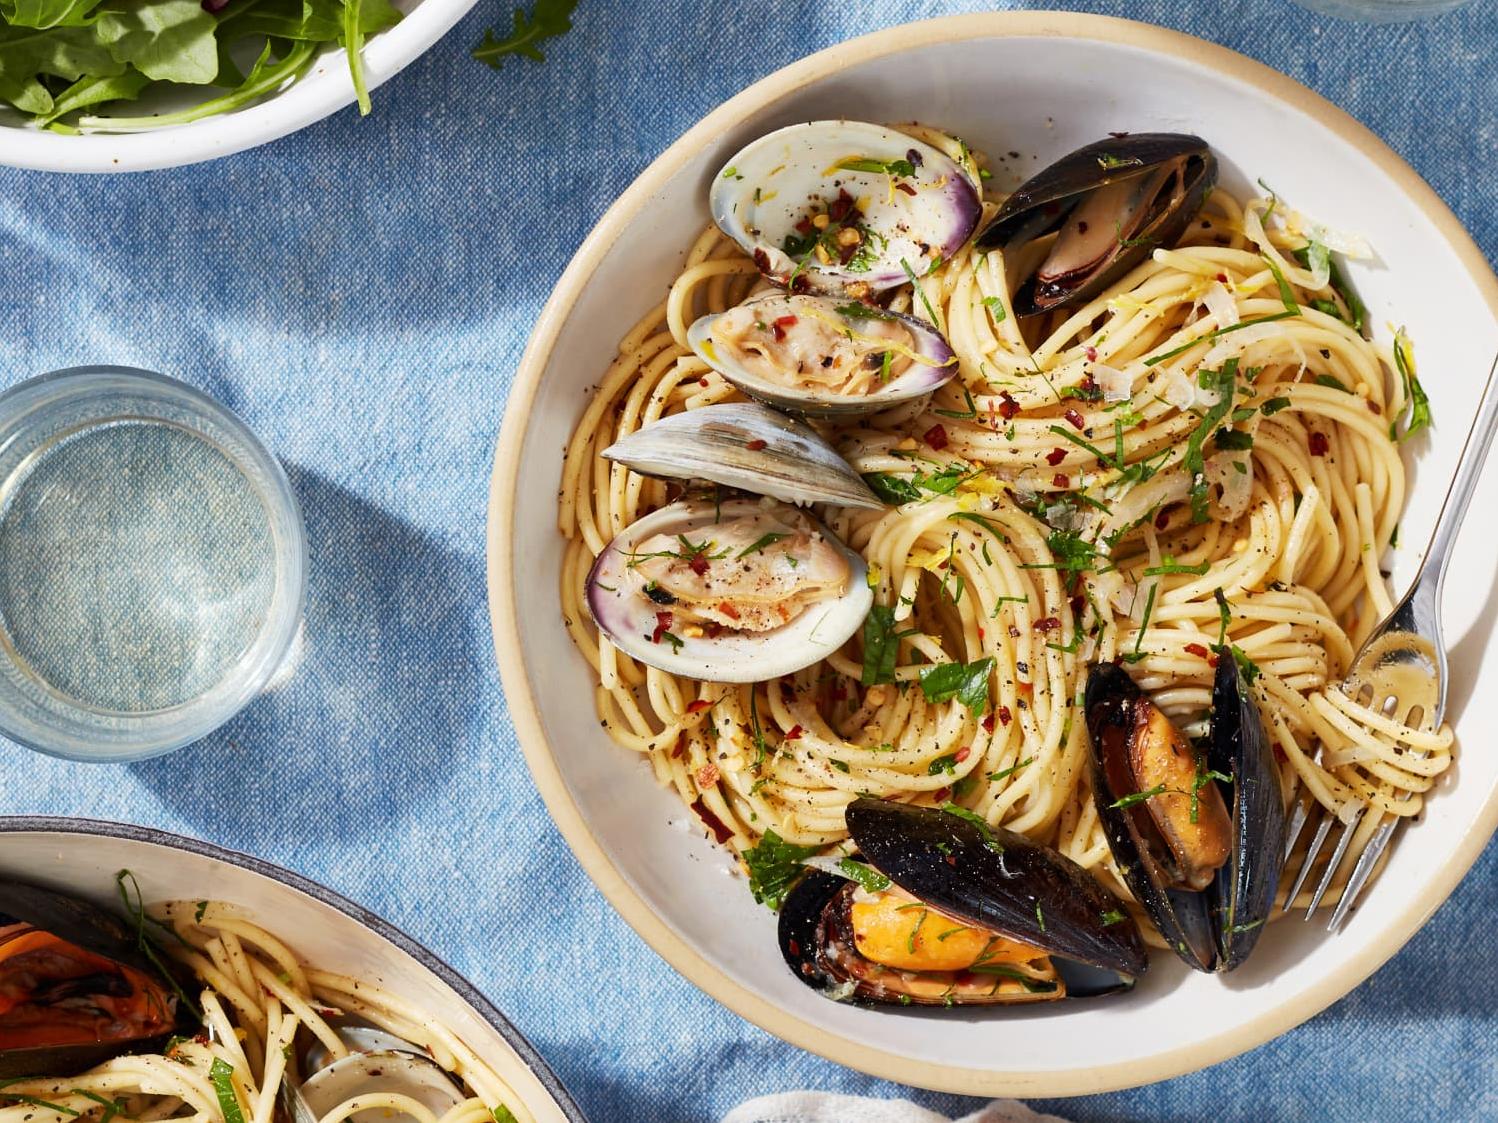  Bring the taste of the Mediterranean to your kitchen with this delicious recipe.